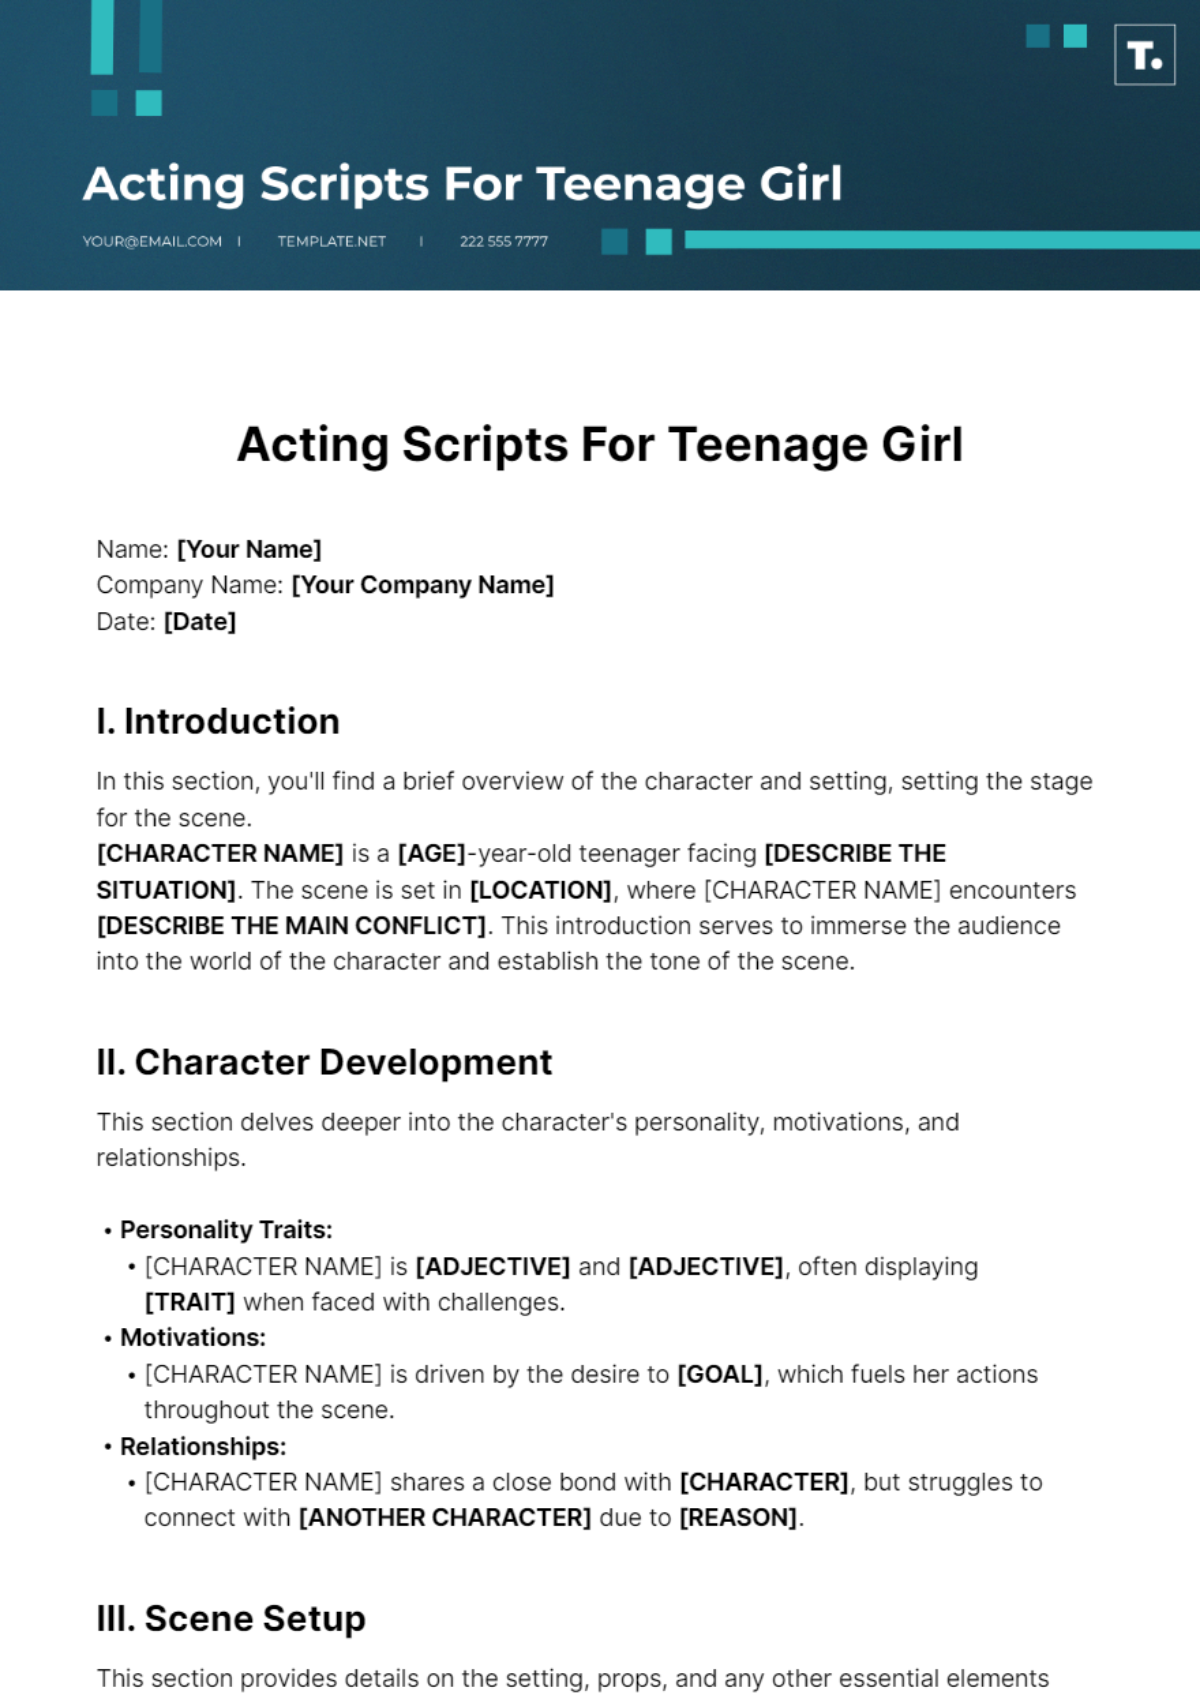 Free Acting Scripts For Teenage Girl Template